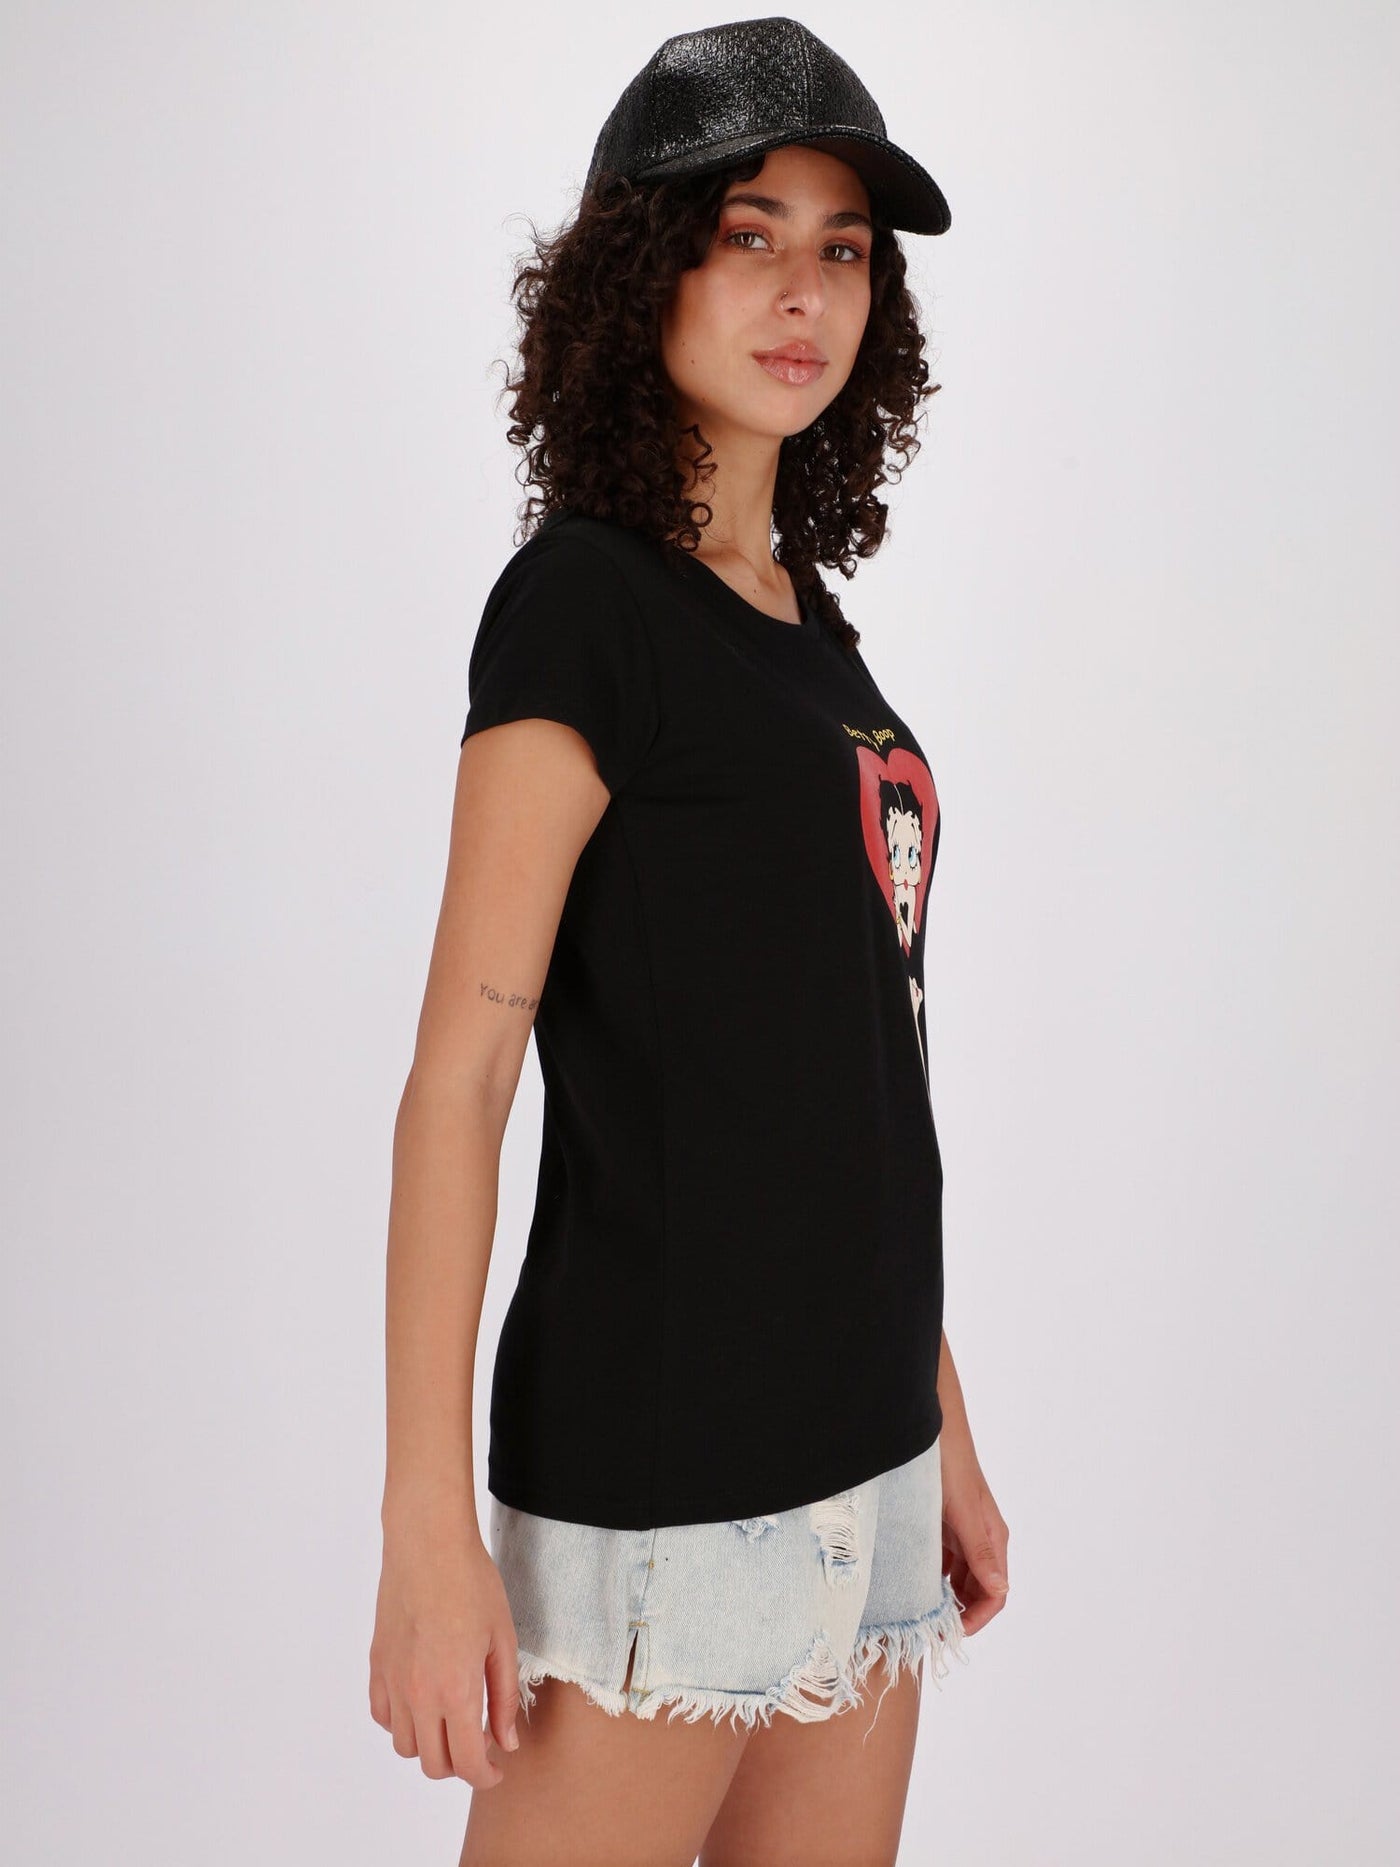 OR Tops & Blouses Betty Boop Printed T-shirt